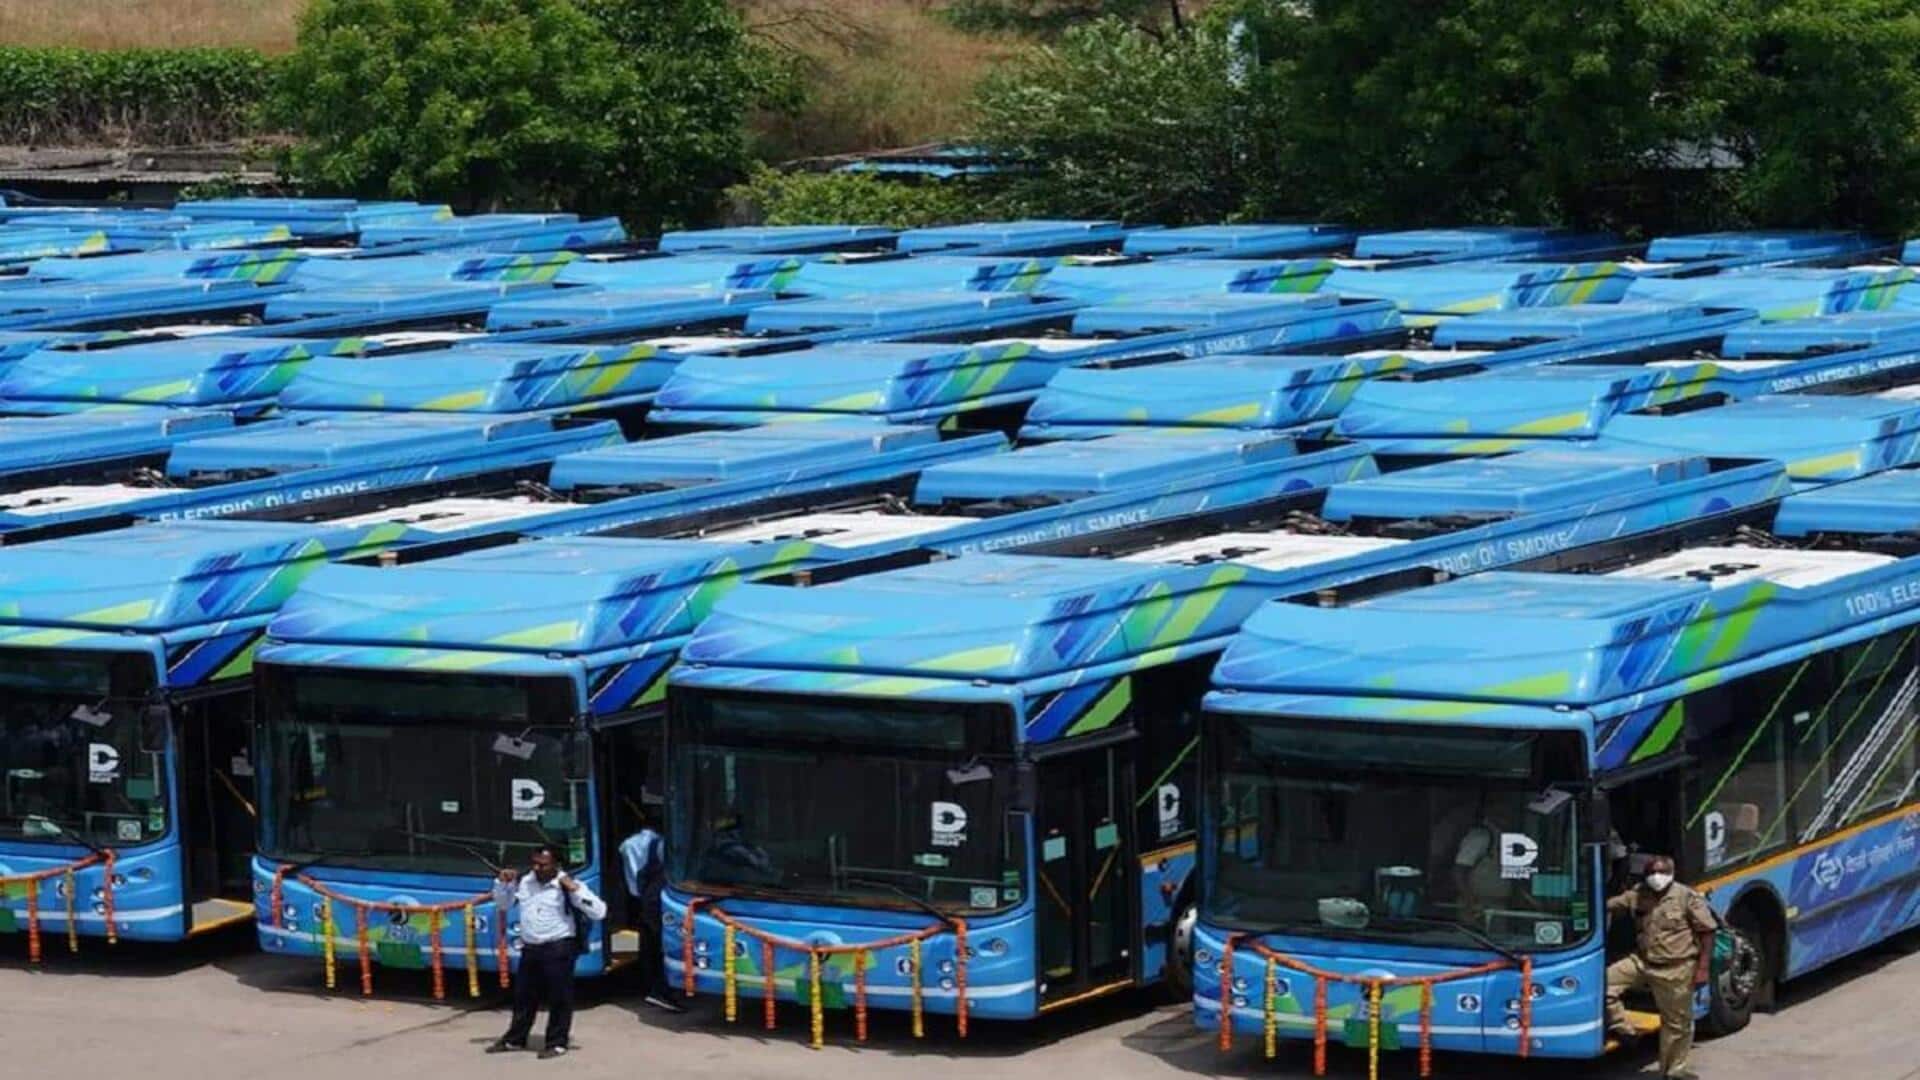 India will have 50,000 electric buses on roads by 2027